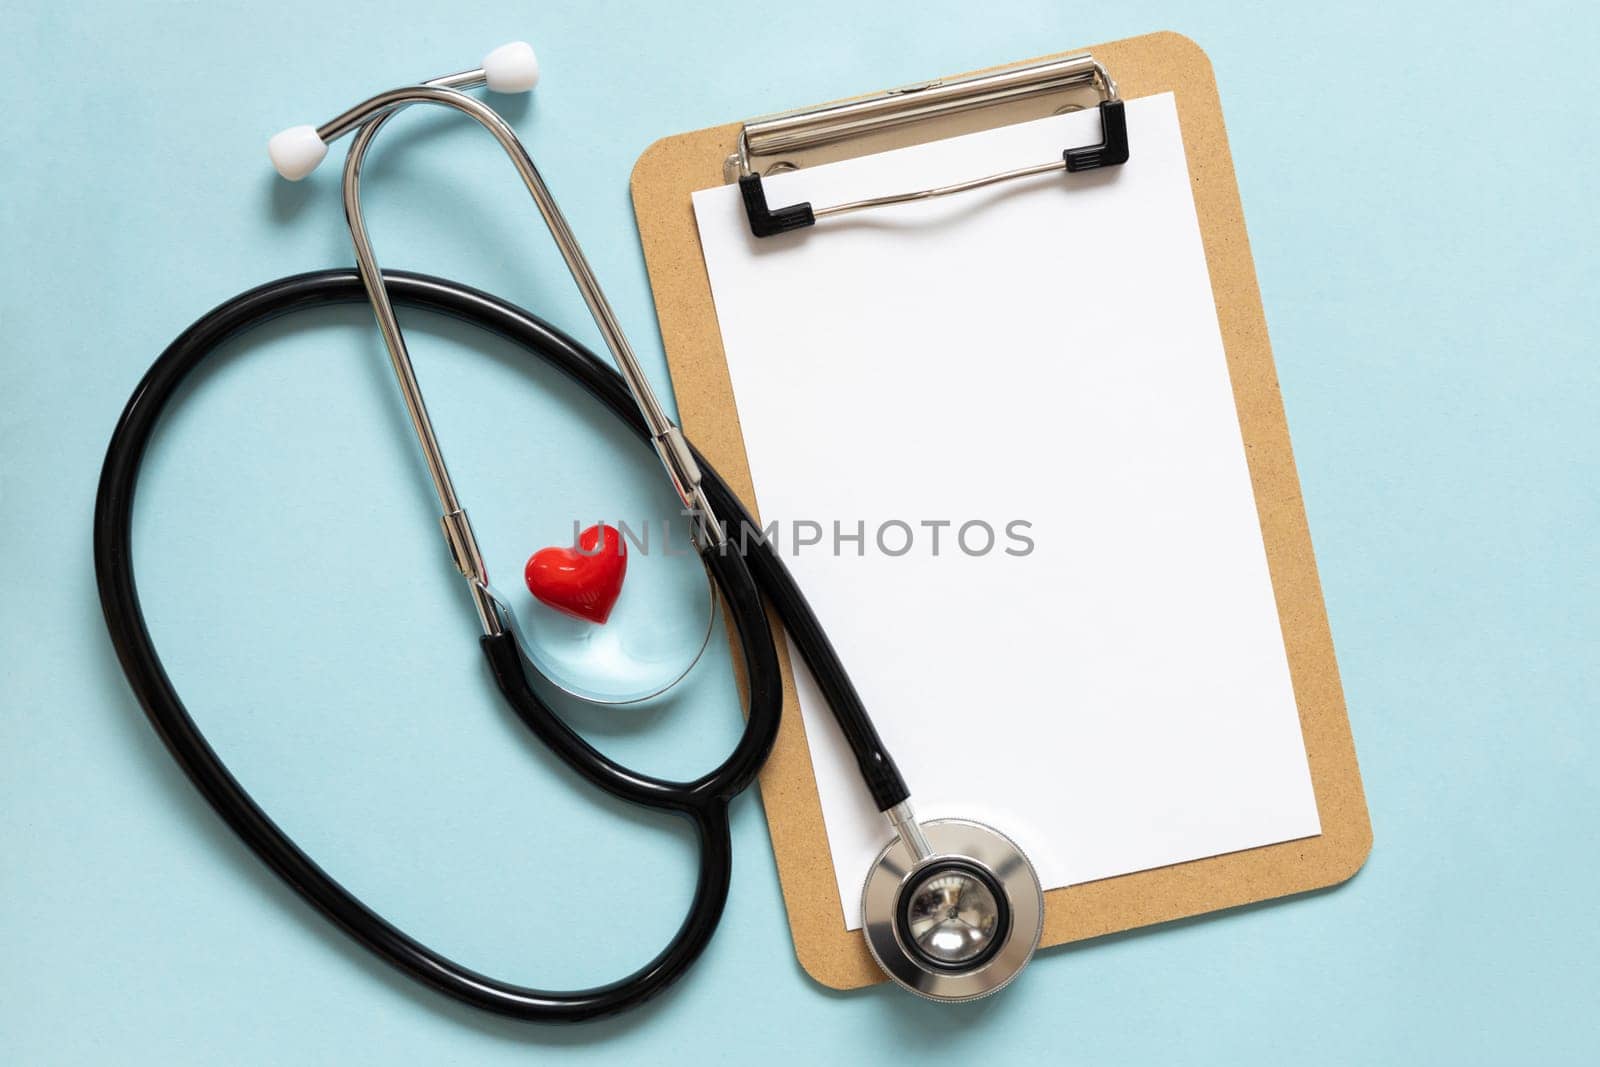 Cardiologist day. Stethoscope, flowers and heart shape, space for text on blue background.